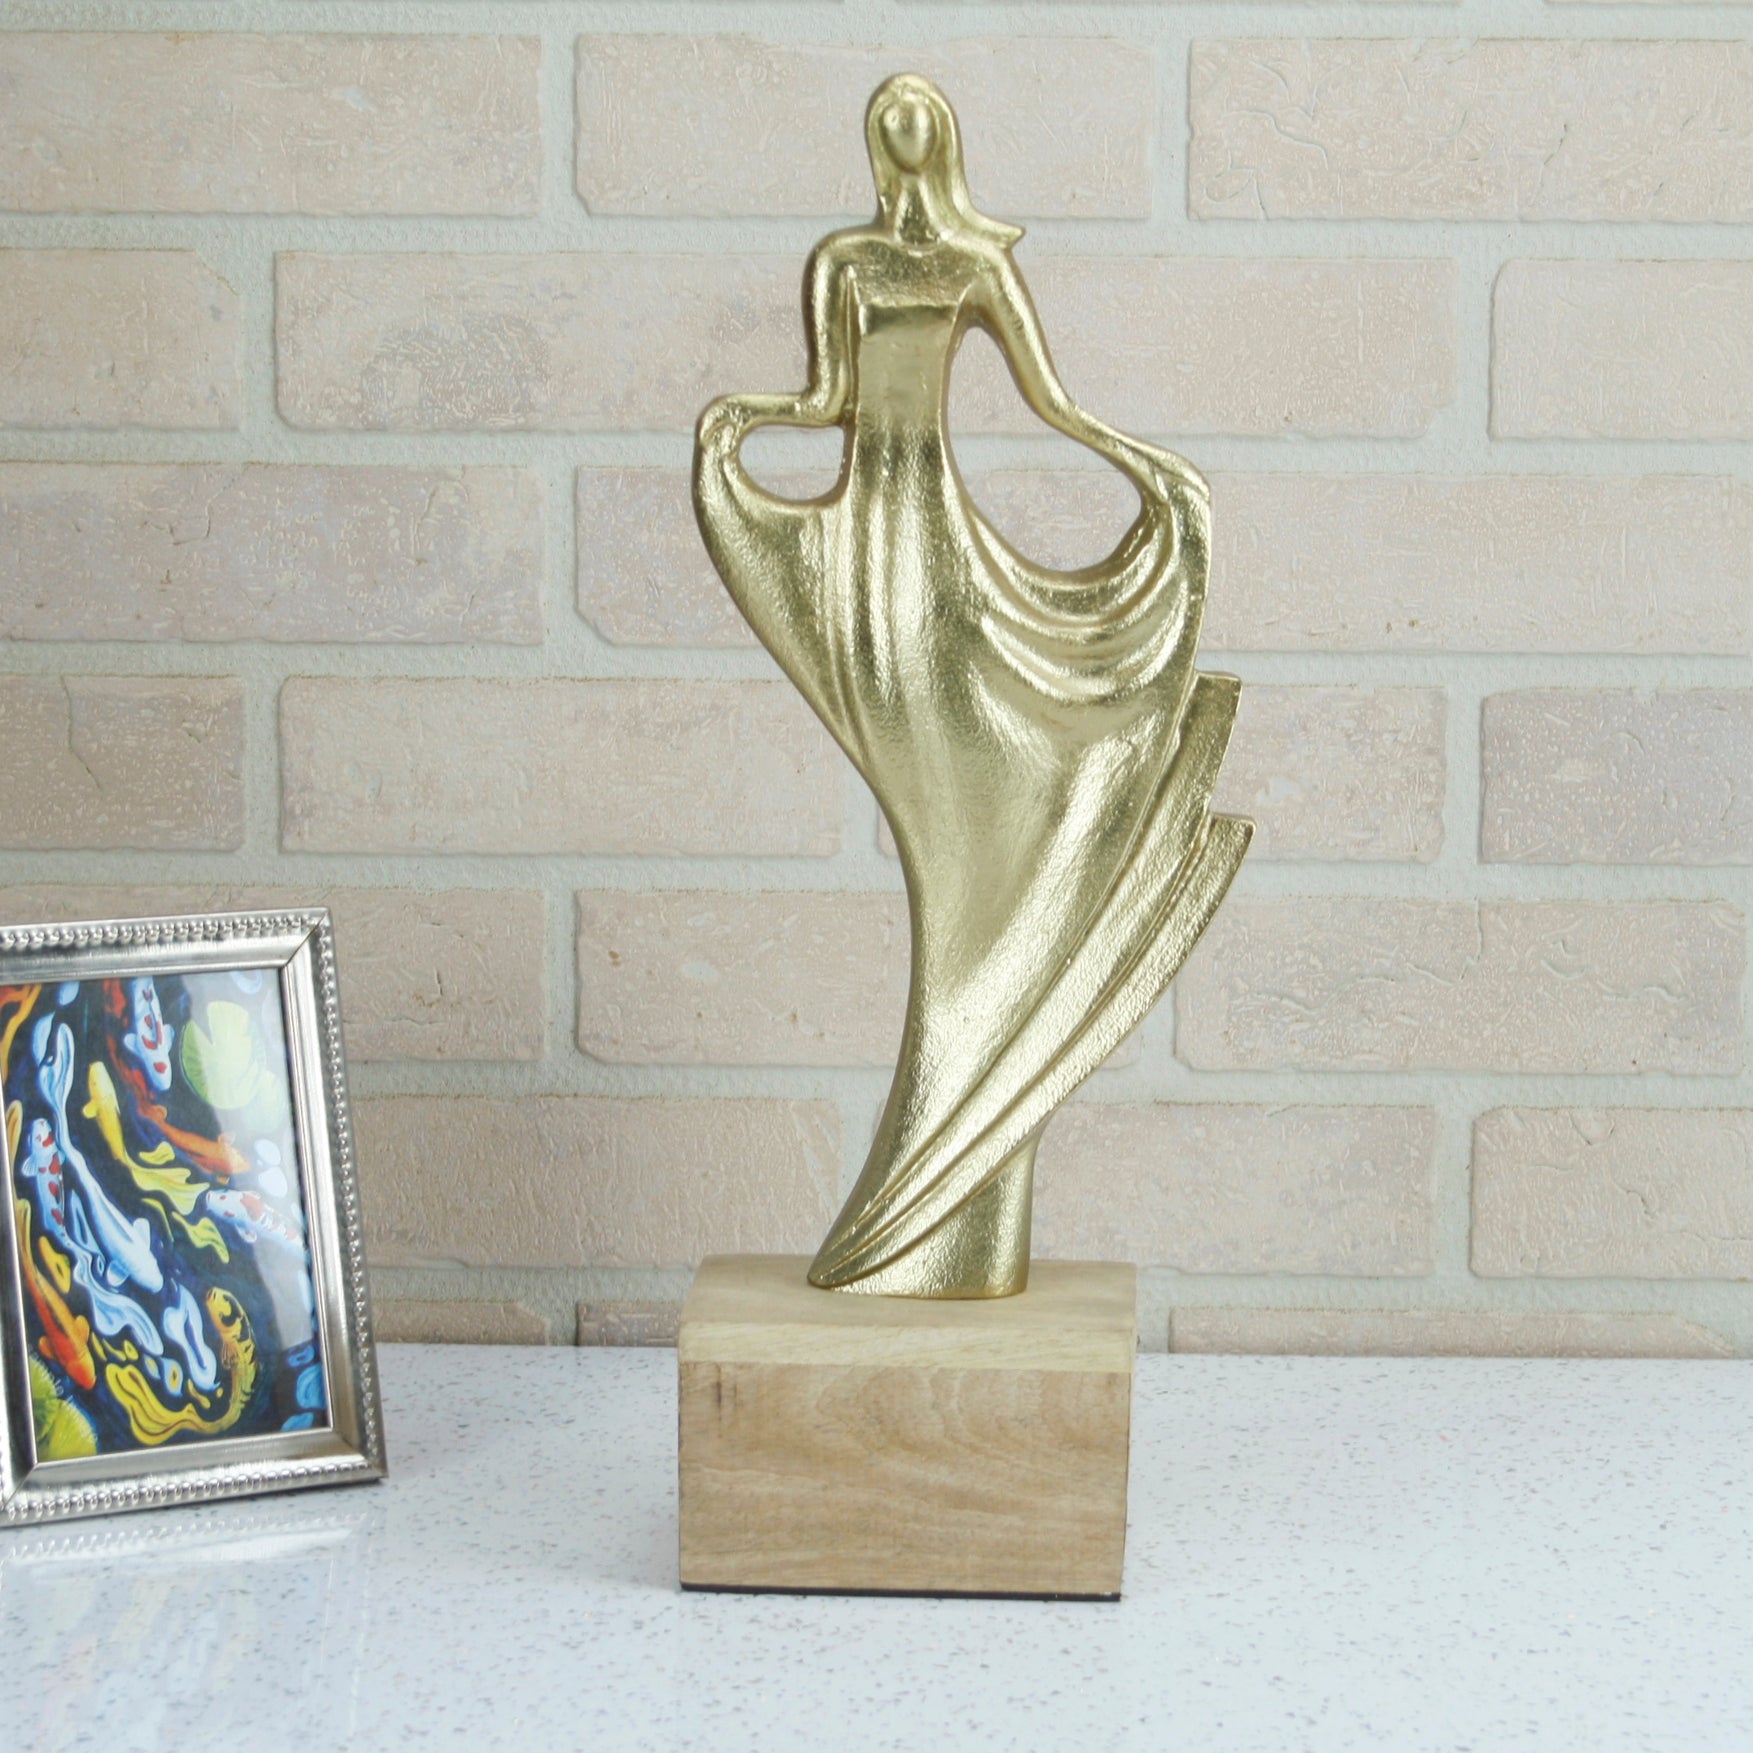 Whimsy Gold Lady Figurine